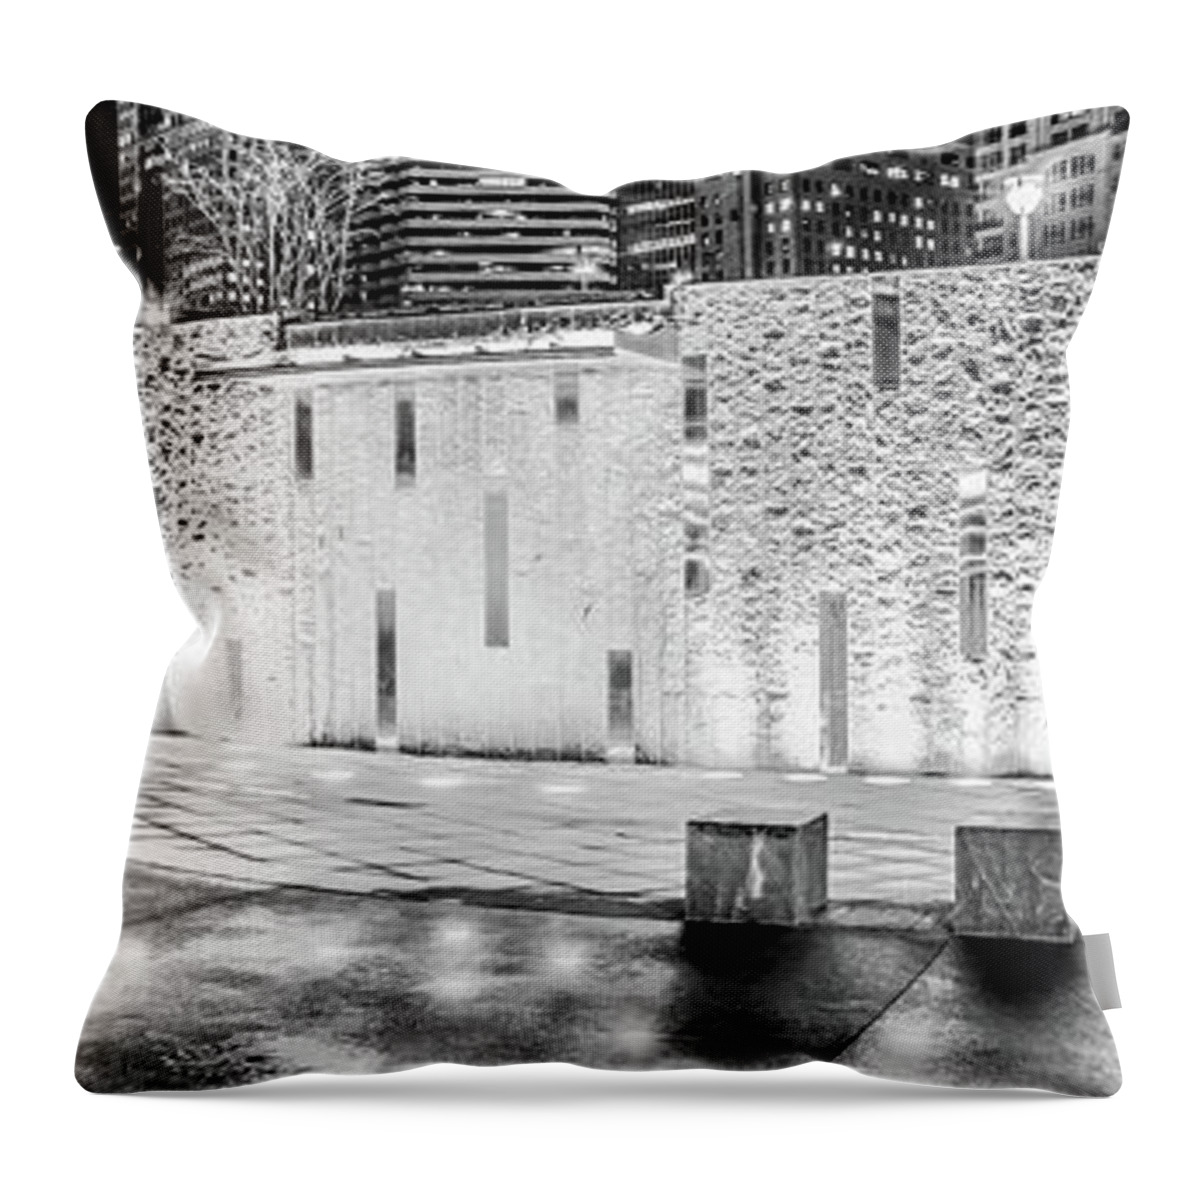 America Throw Pillow featuring the photograph Charlotte Bearden Park Waterfall Fountain Panorama Photo by Paul Velgos